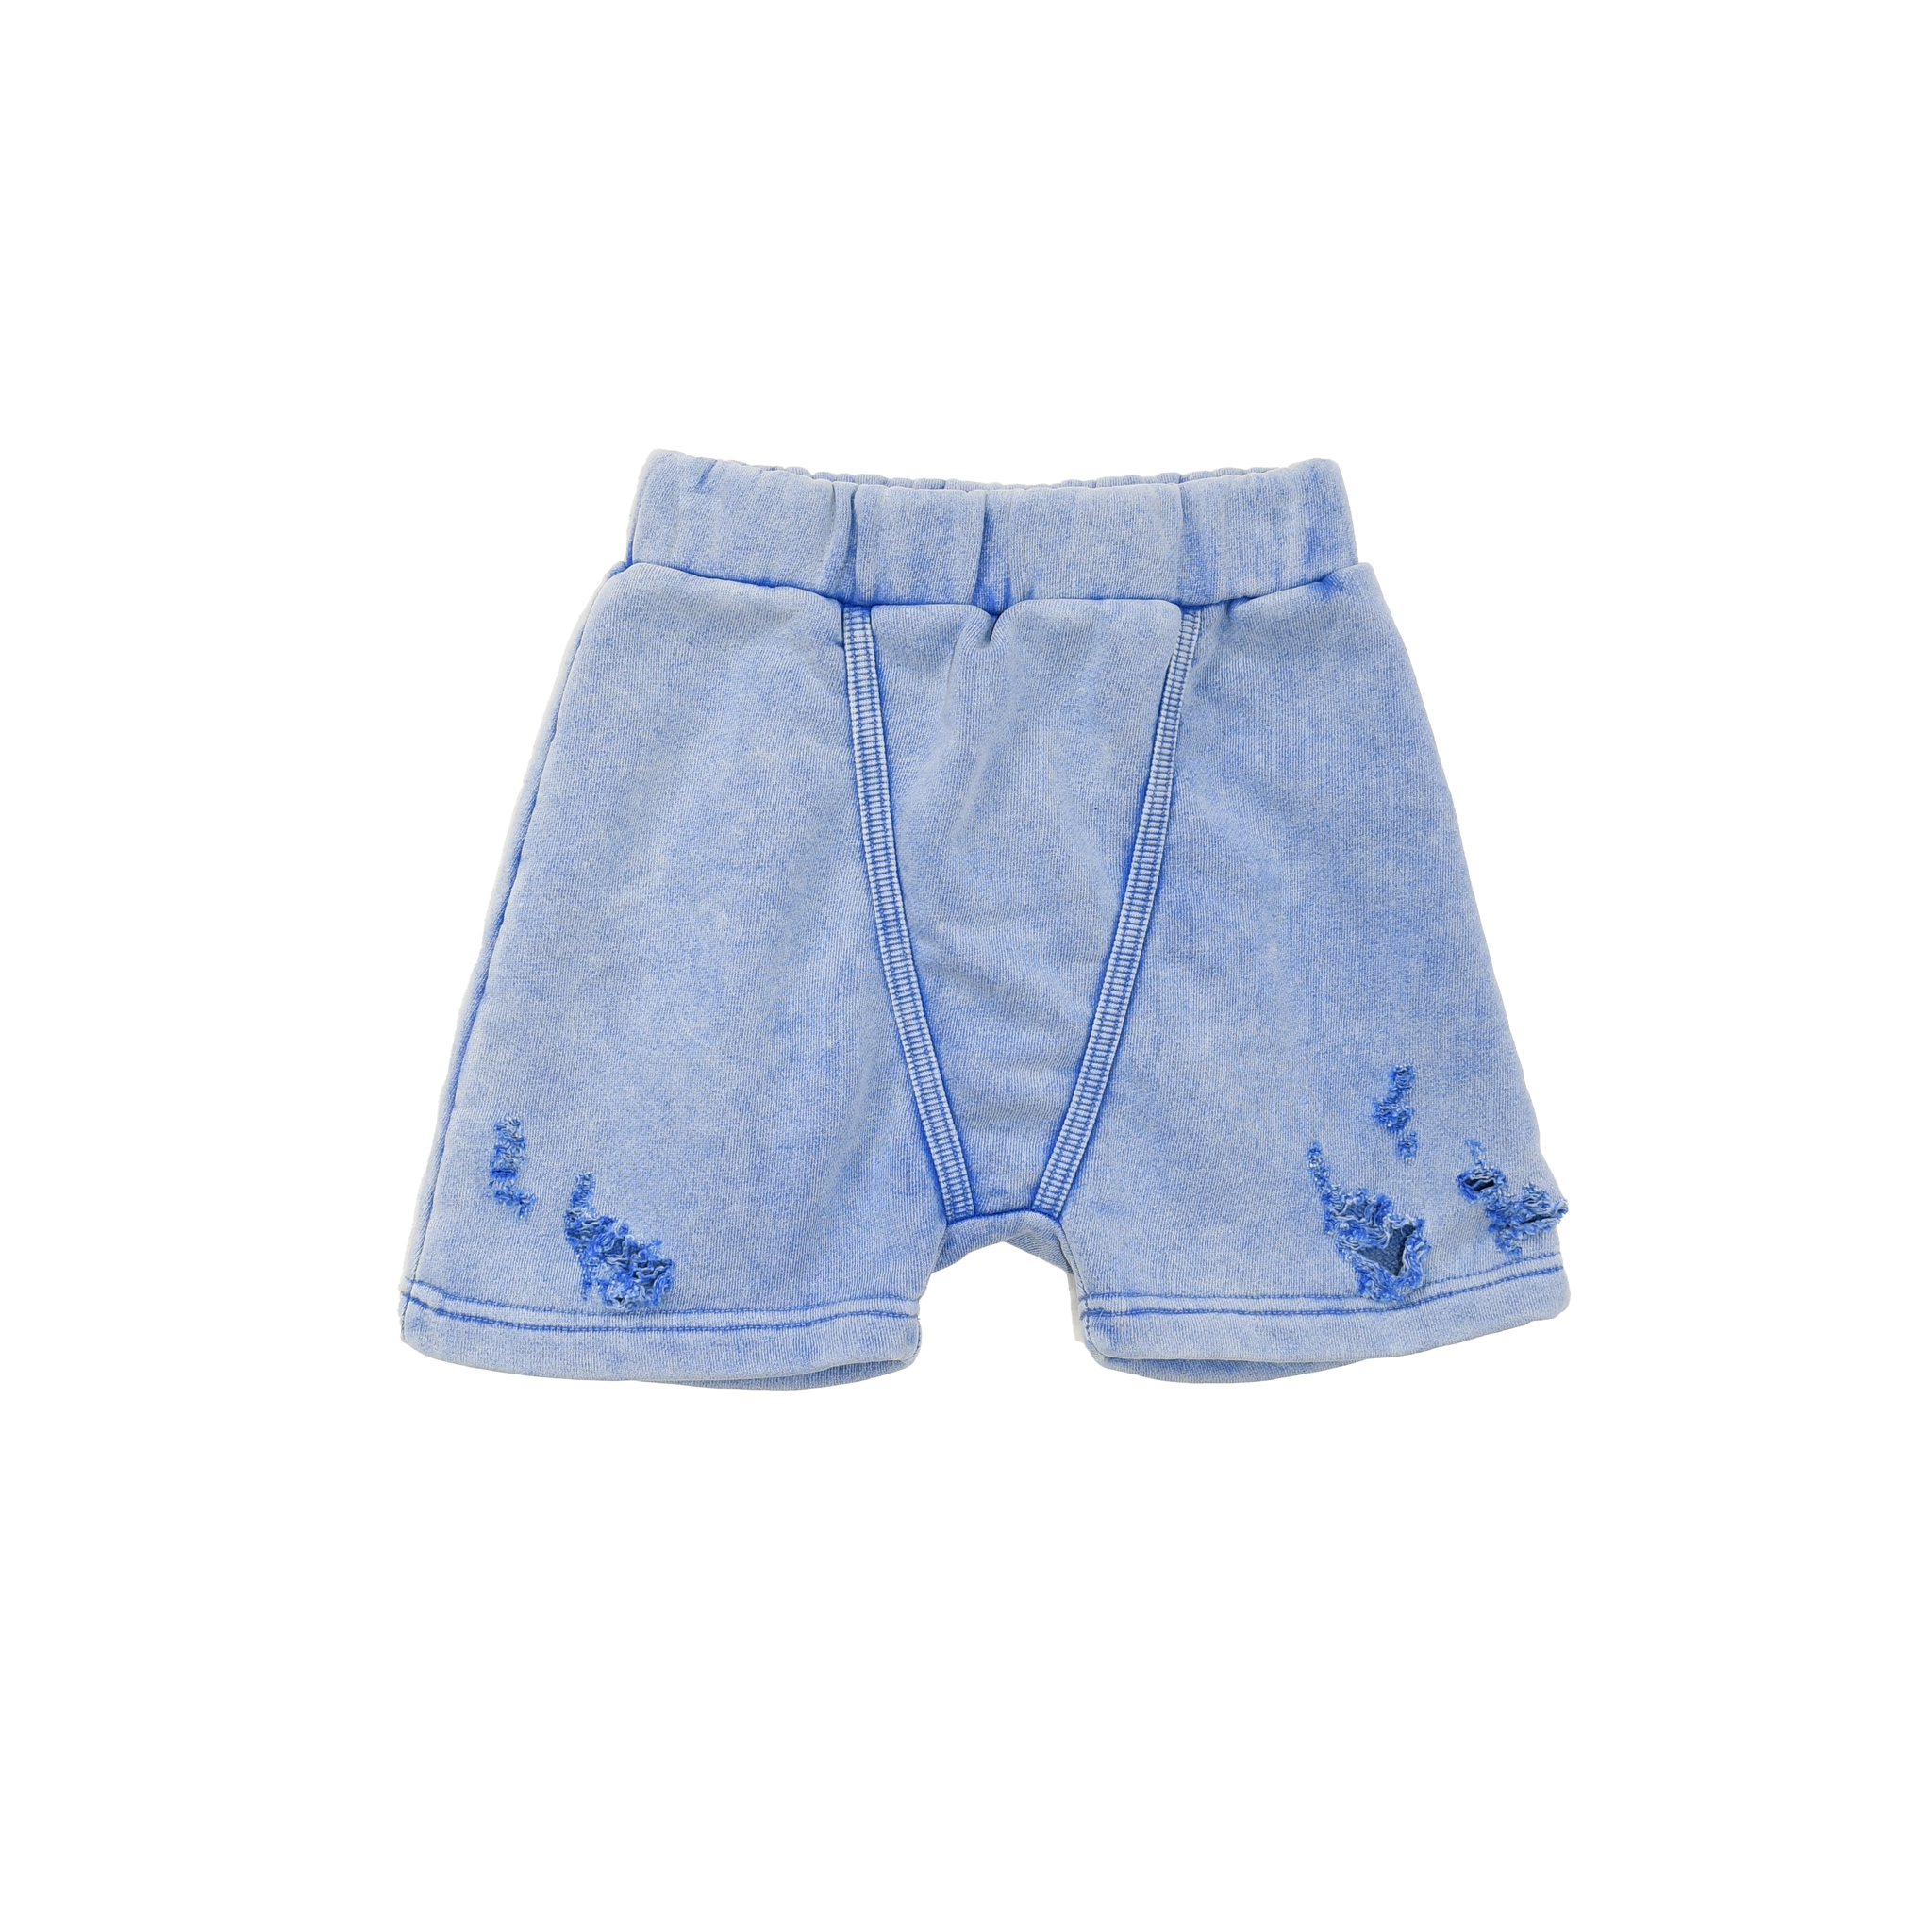 604SERVICE - Distressed Shorts - Blue Wash